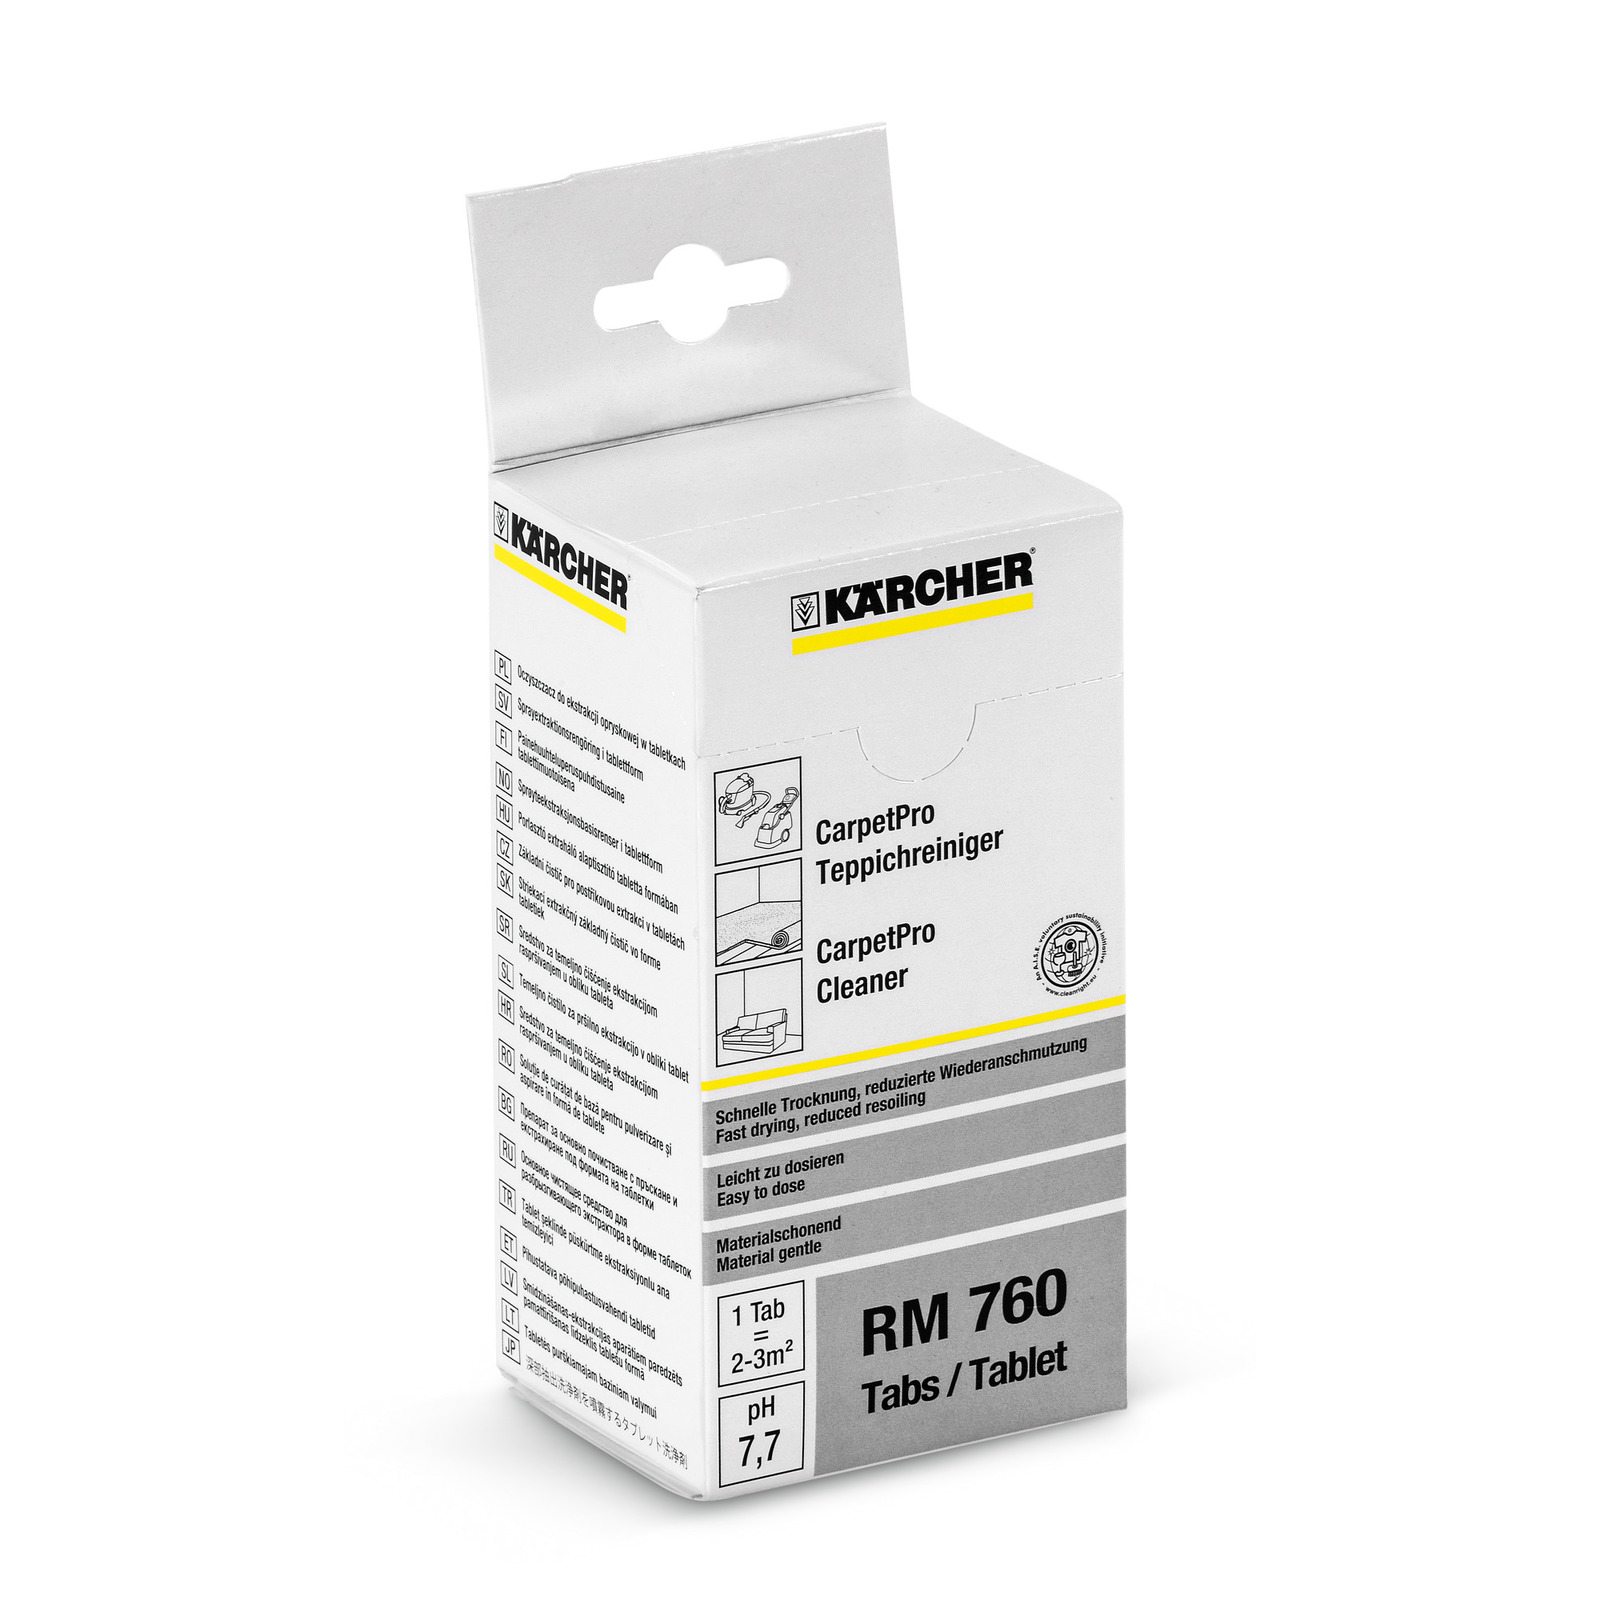 Karcher RM 760 Carpet Cleaning iCapsol Tablets 16 Count 6.290-828.0 Encapsulation No Rinse Technology 6.295-850.0